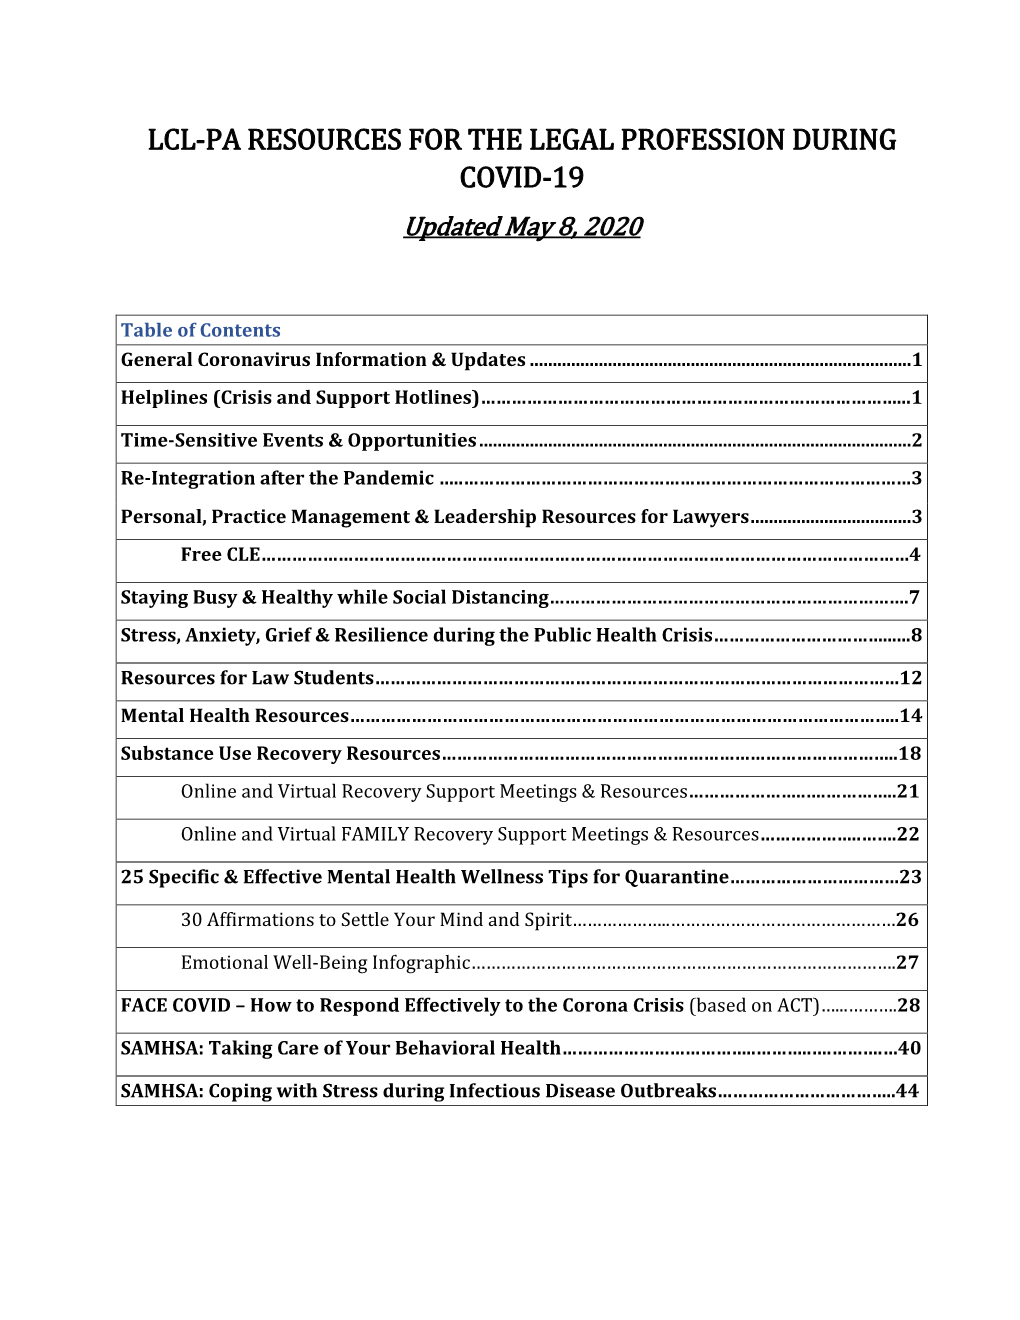 LCL-PA RESOURCES for the LEGAL PROFESSION DURING COVID-19 Updated May 8, 2020